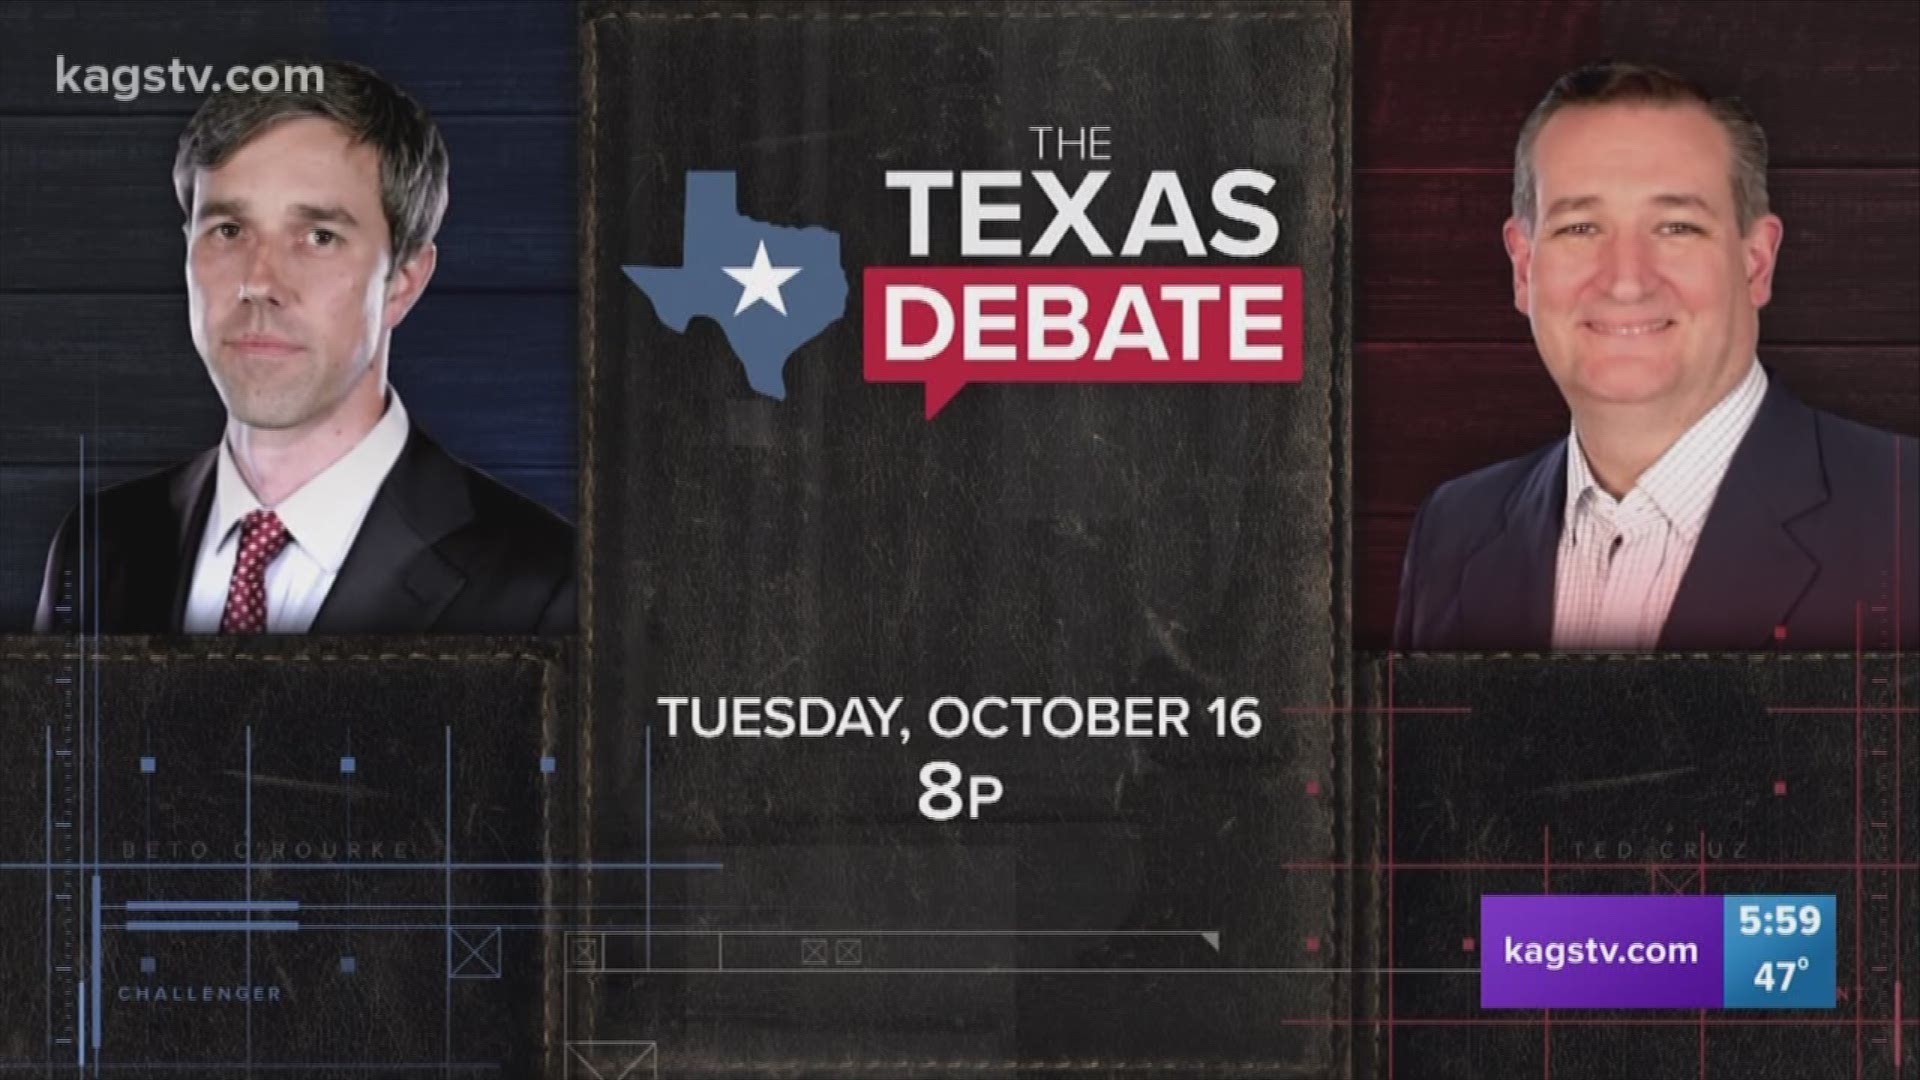 You can watch the second debate between Cruz and O'Rourke right here on KAGS during prime time programming at 8 pm.